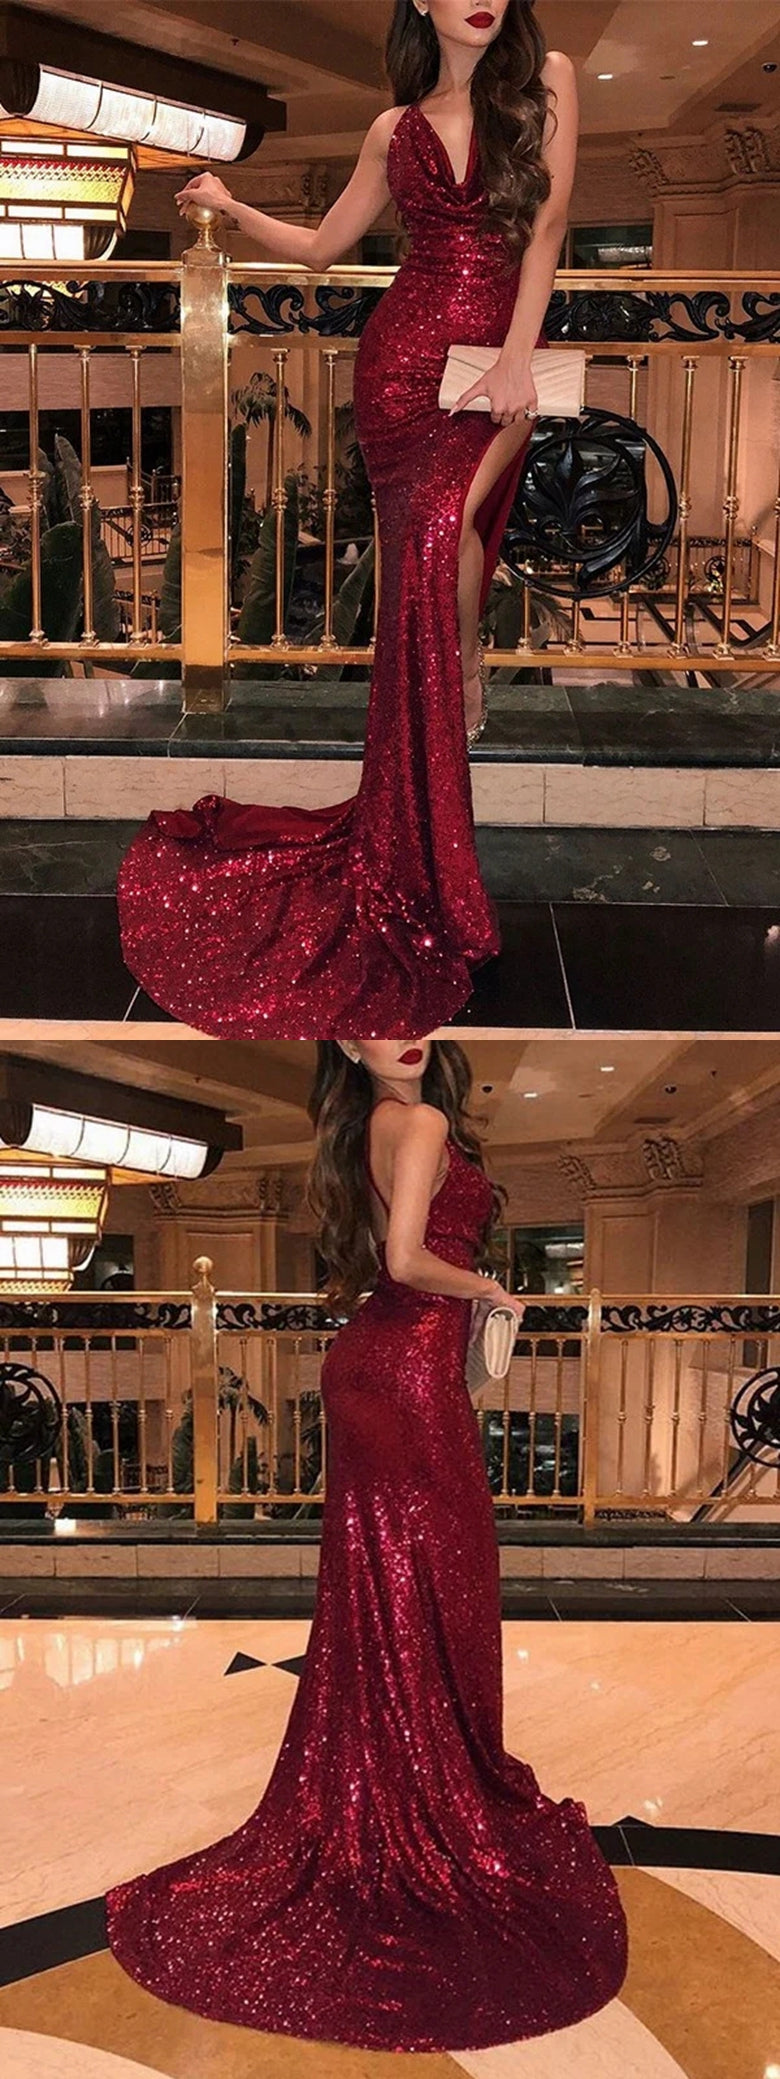 Sexy Sparkling Prom Dress with Slit, Formal Dress, Evening Dress, Pageant Dance Dresses, School Party Gown, PC0721